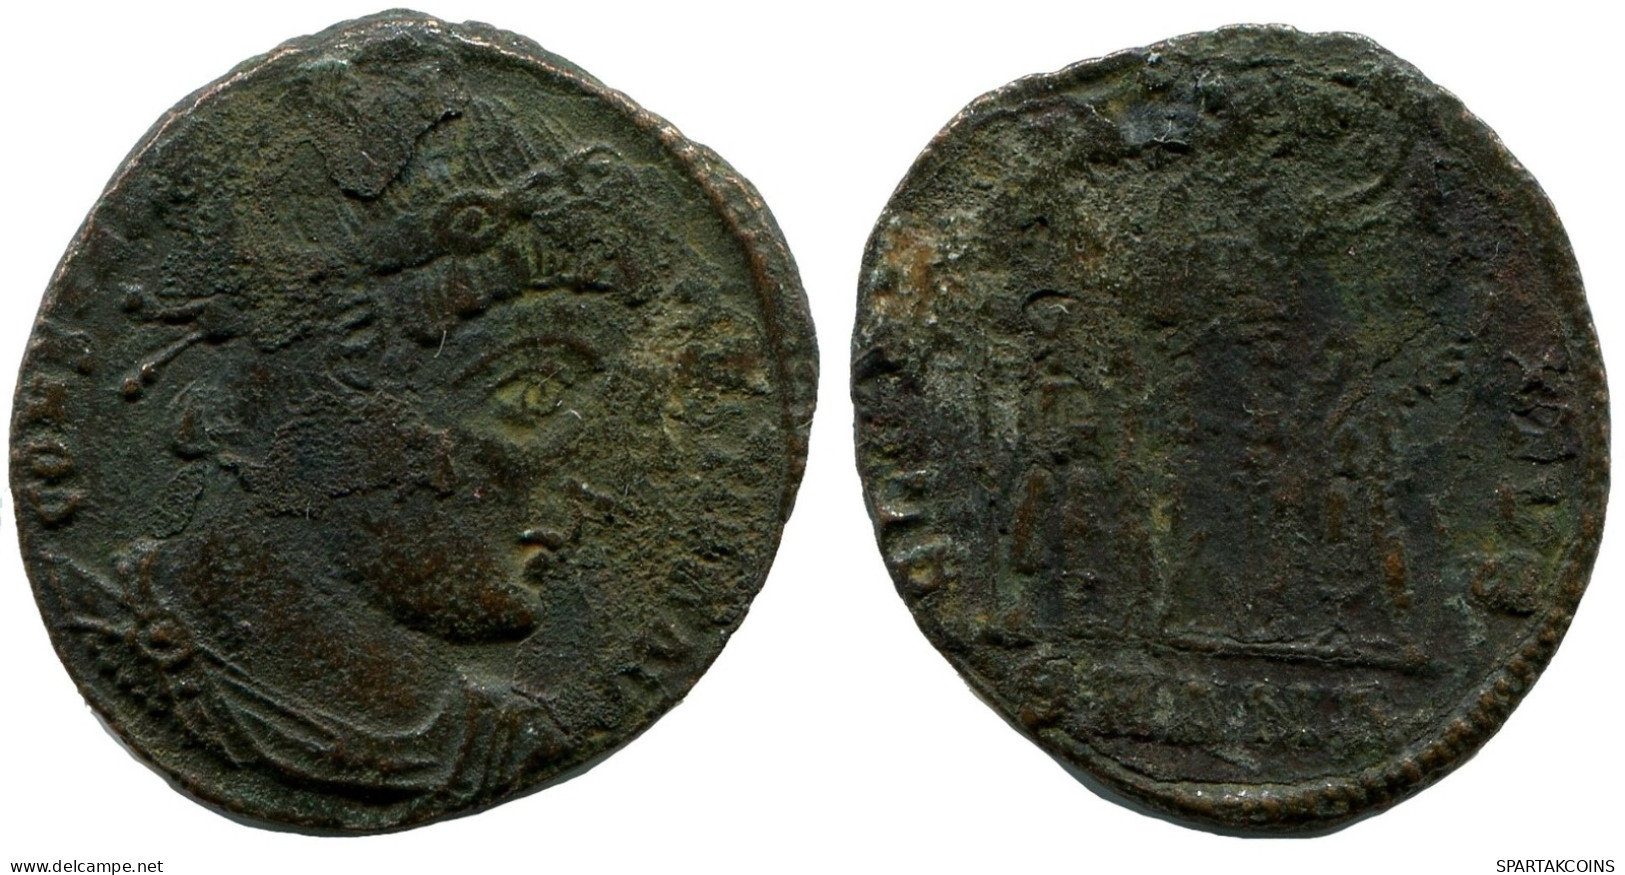 CONSTANTINE I MINTED IN ANTIOCH FOUND IN IHNASYAH HOARD EGYPT #ANC10590.14.E.A - The Christian Empire (307 AD To 363 AD)